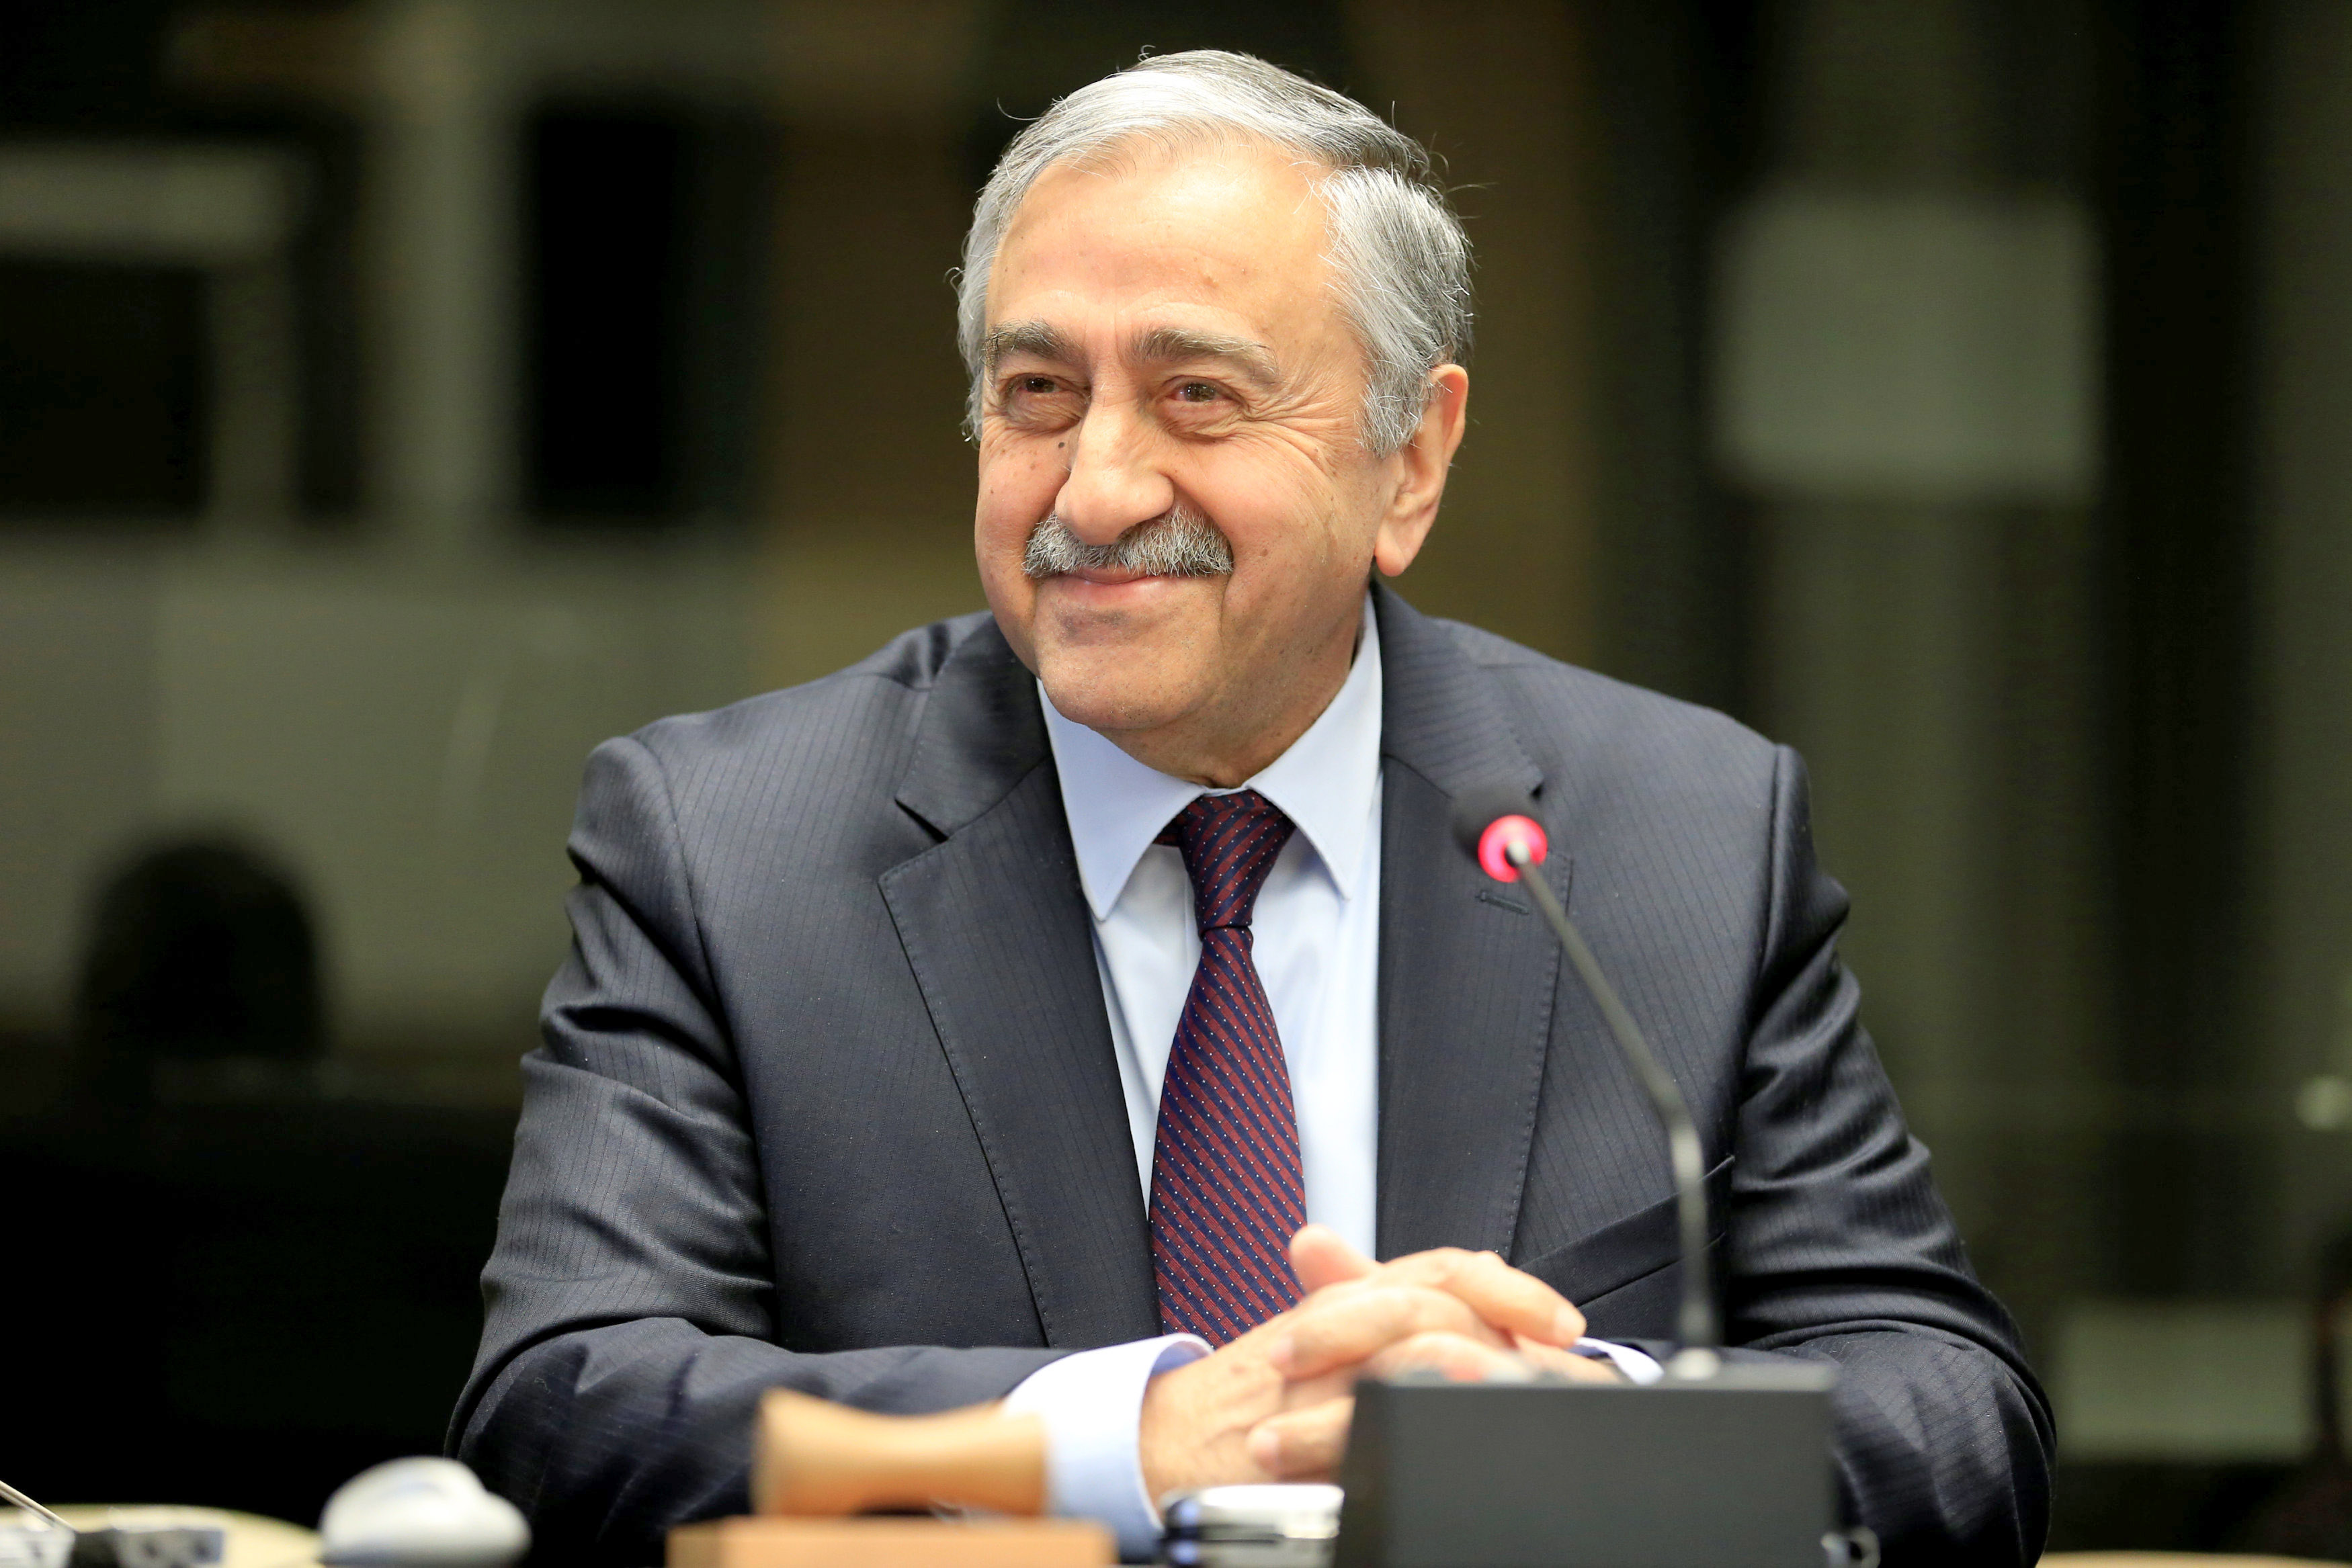 image BBF remains the only ‘realistic solution’ for reunification, Akinci says